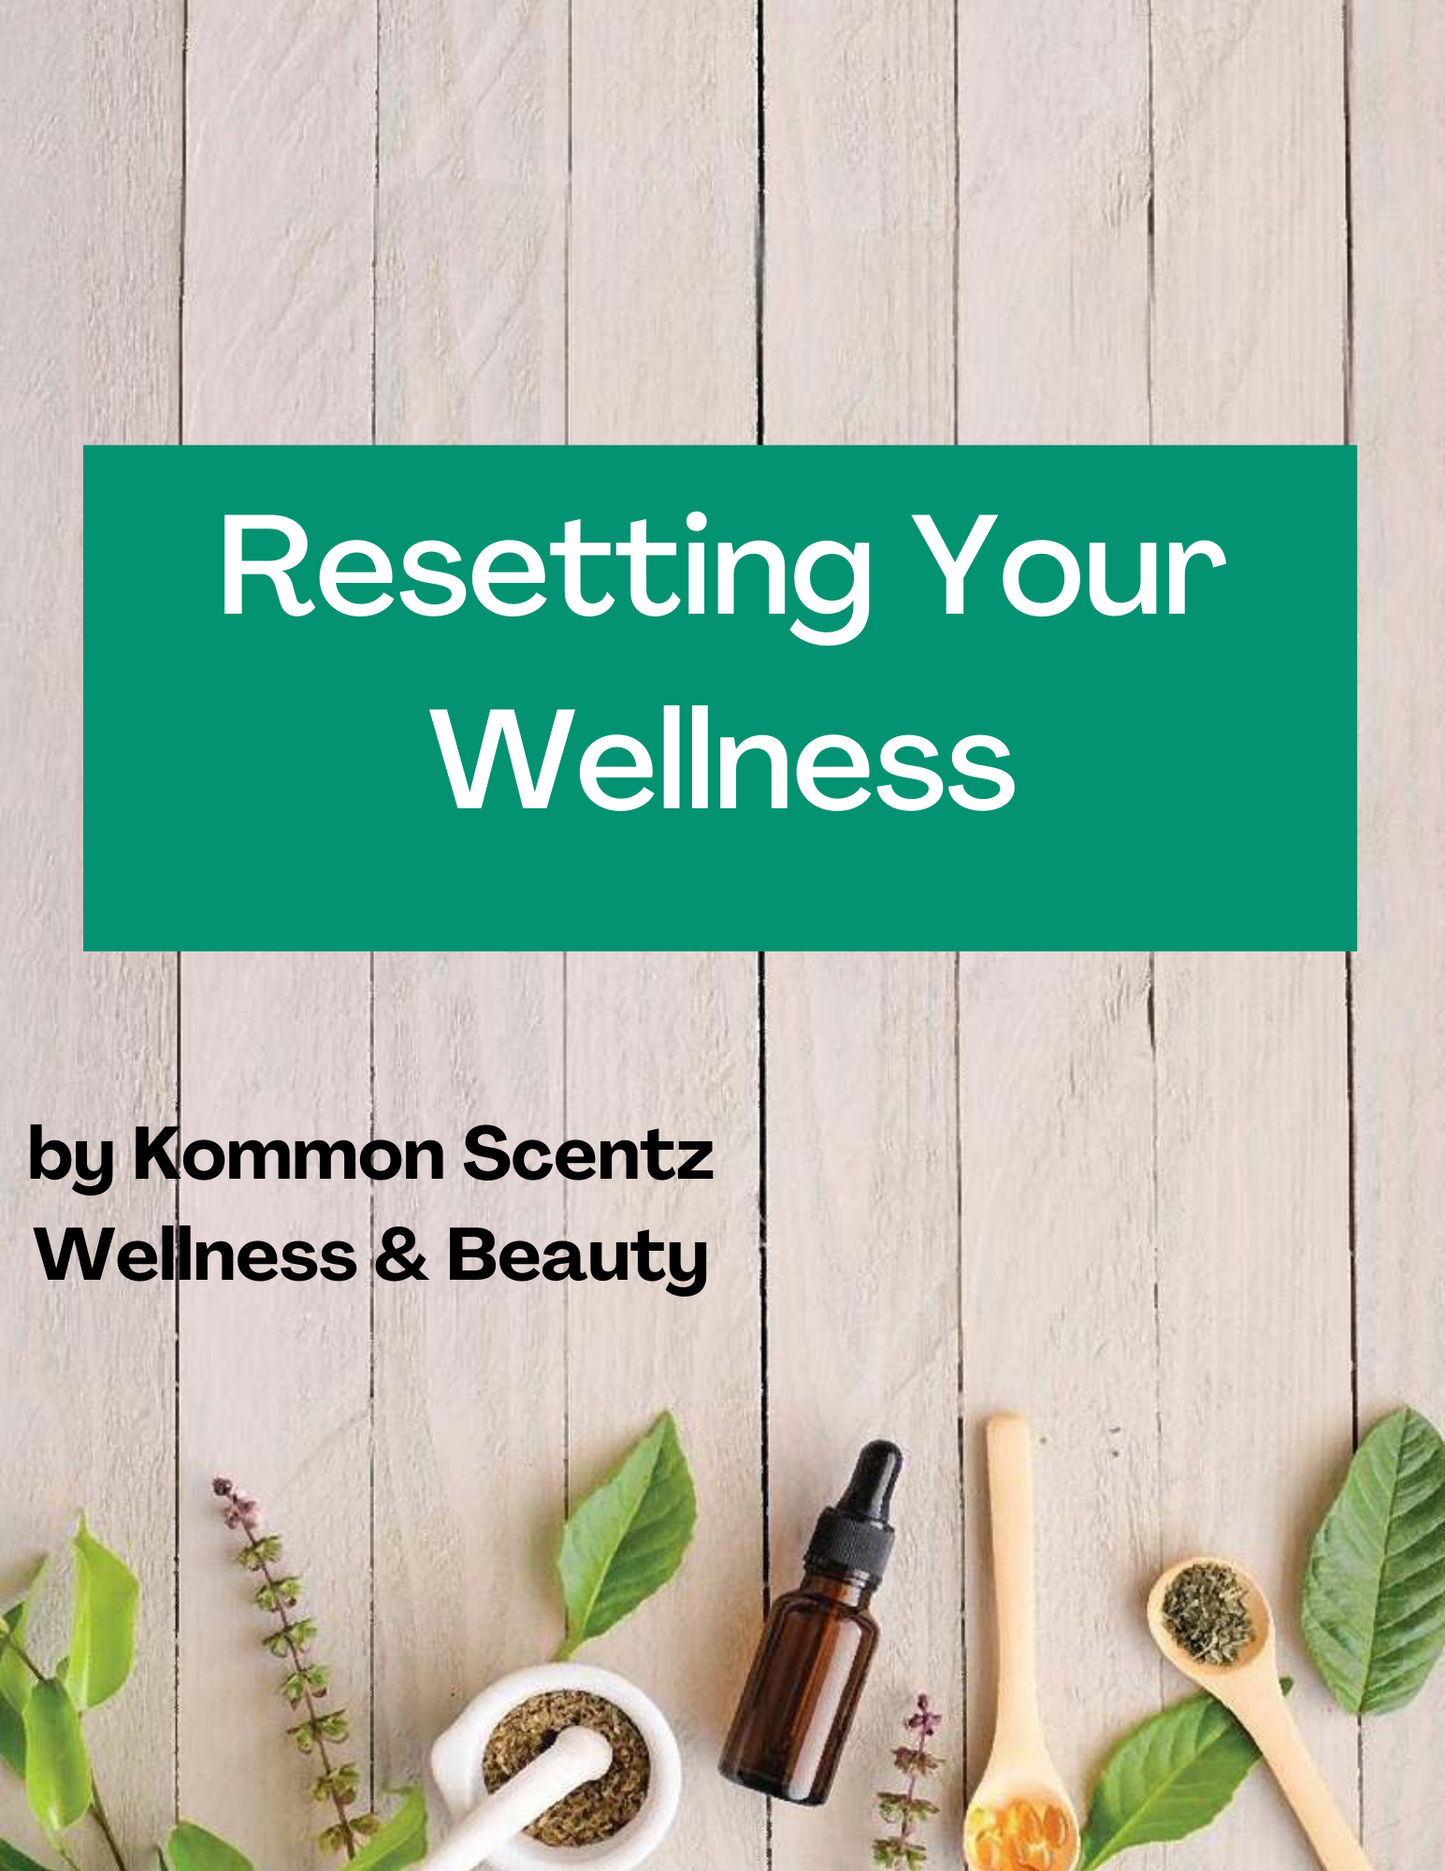 "Resetting Your Wellness" E-book